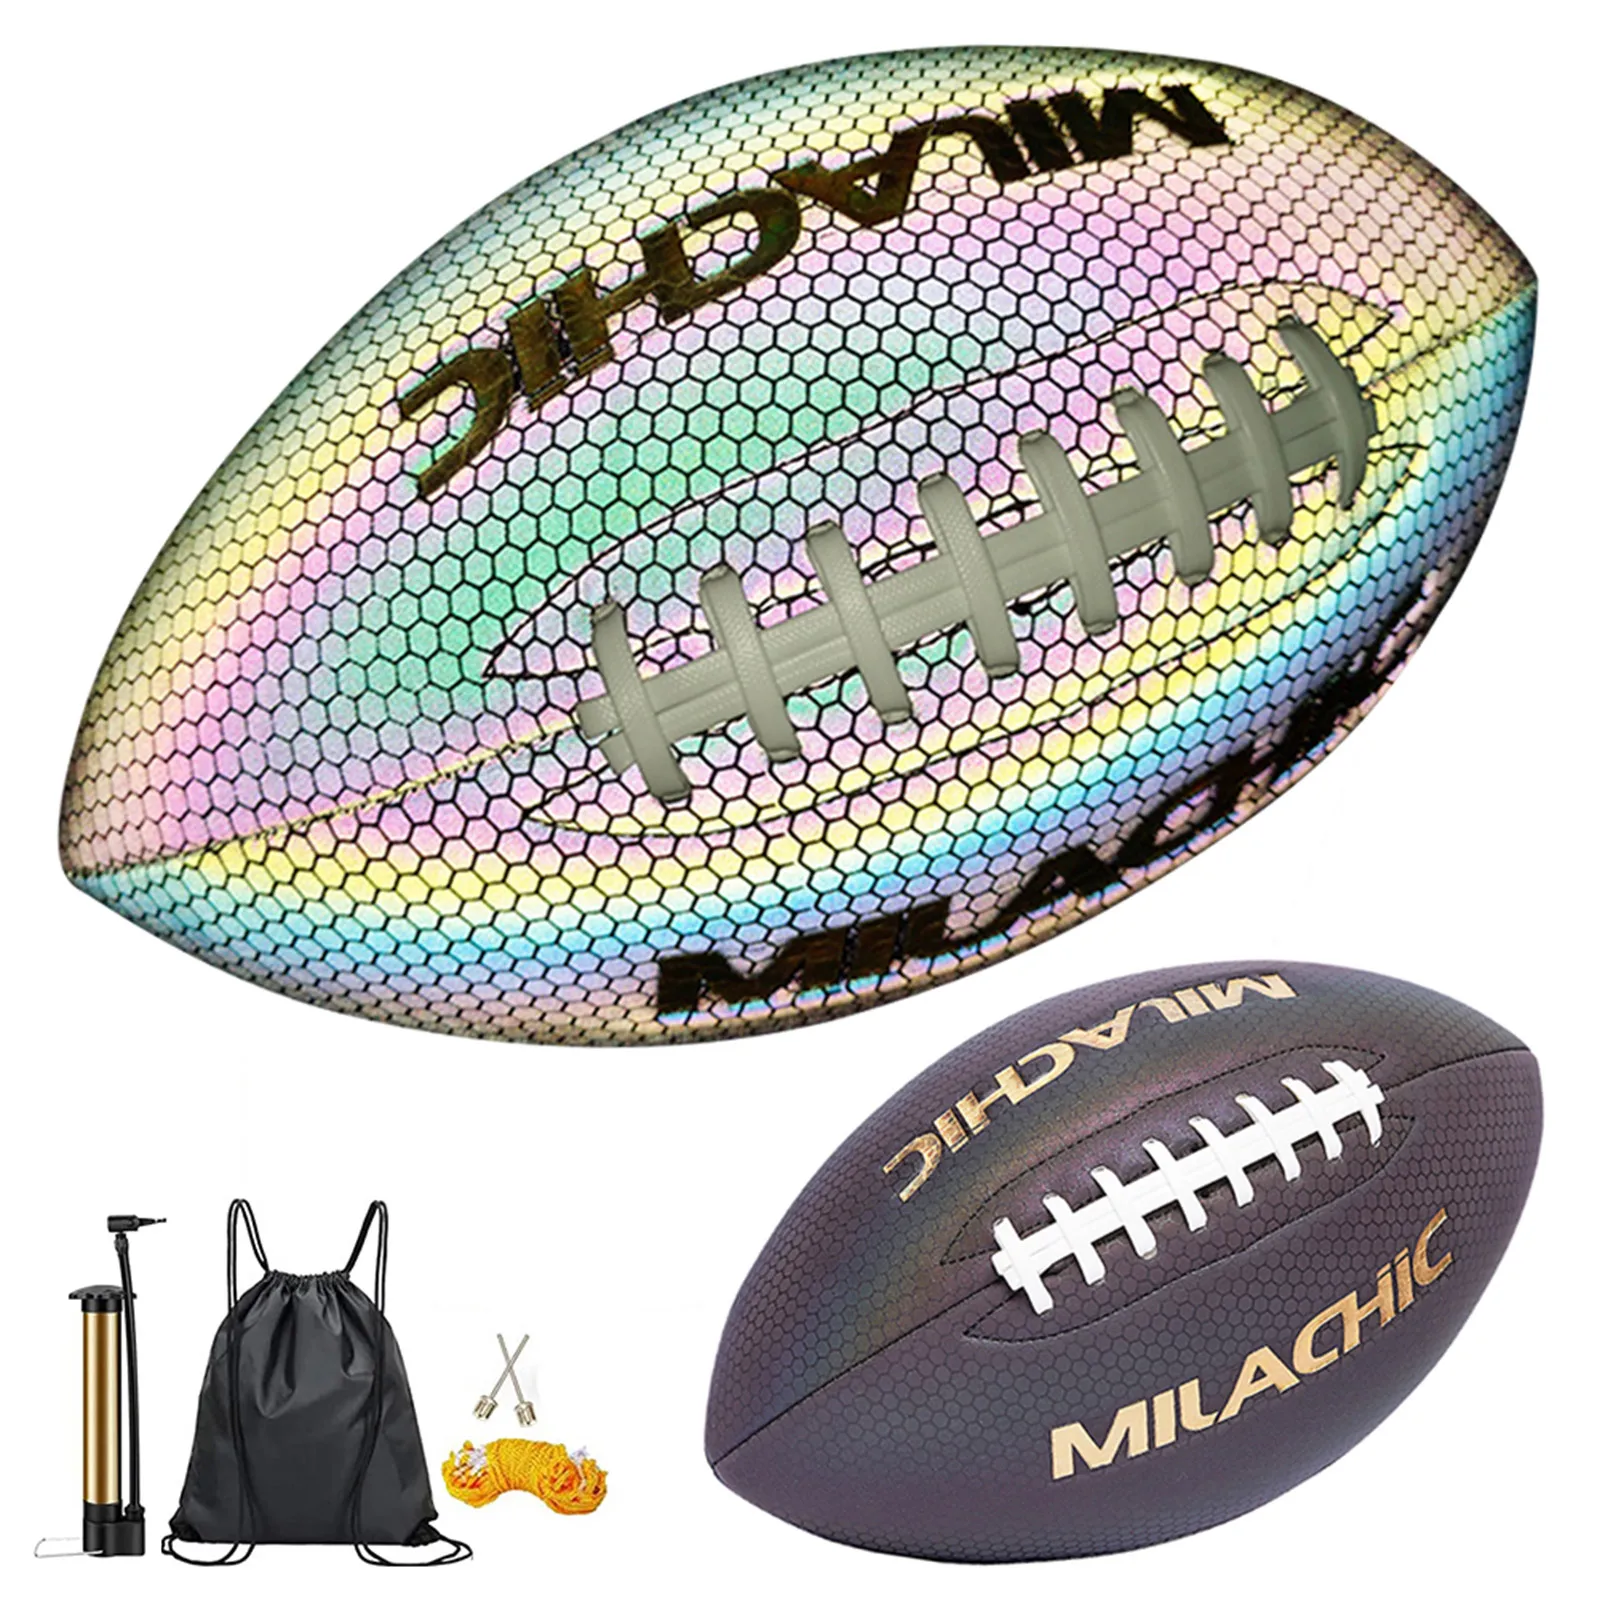 Holographic Football Light Fluorescent Reflective Rugby Standard Game Training Ball Best Gift For Football Lovers